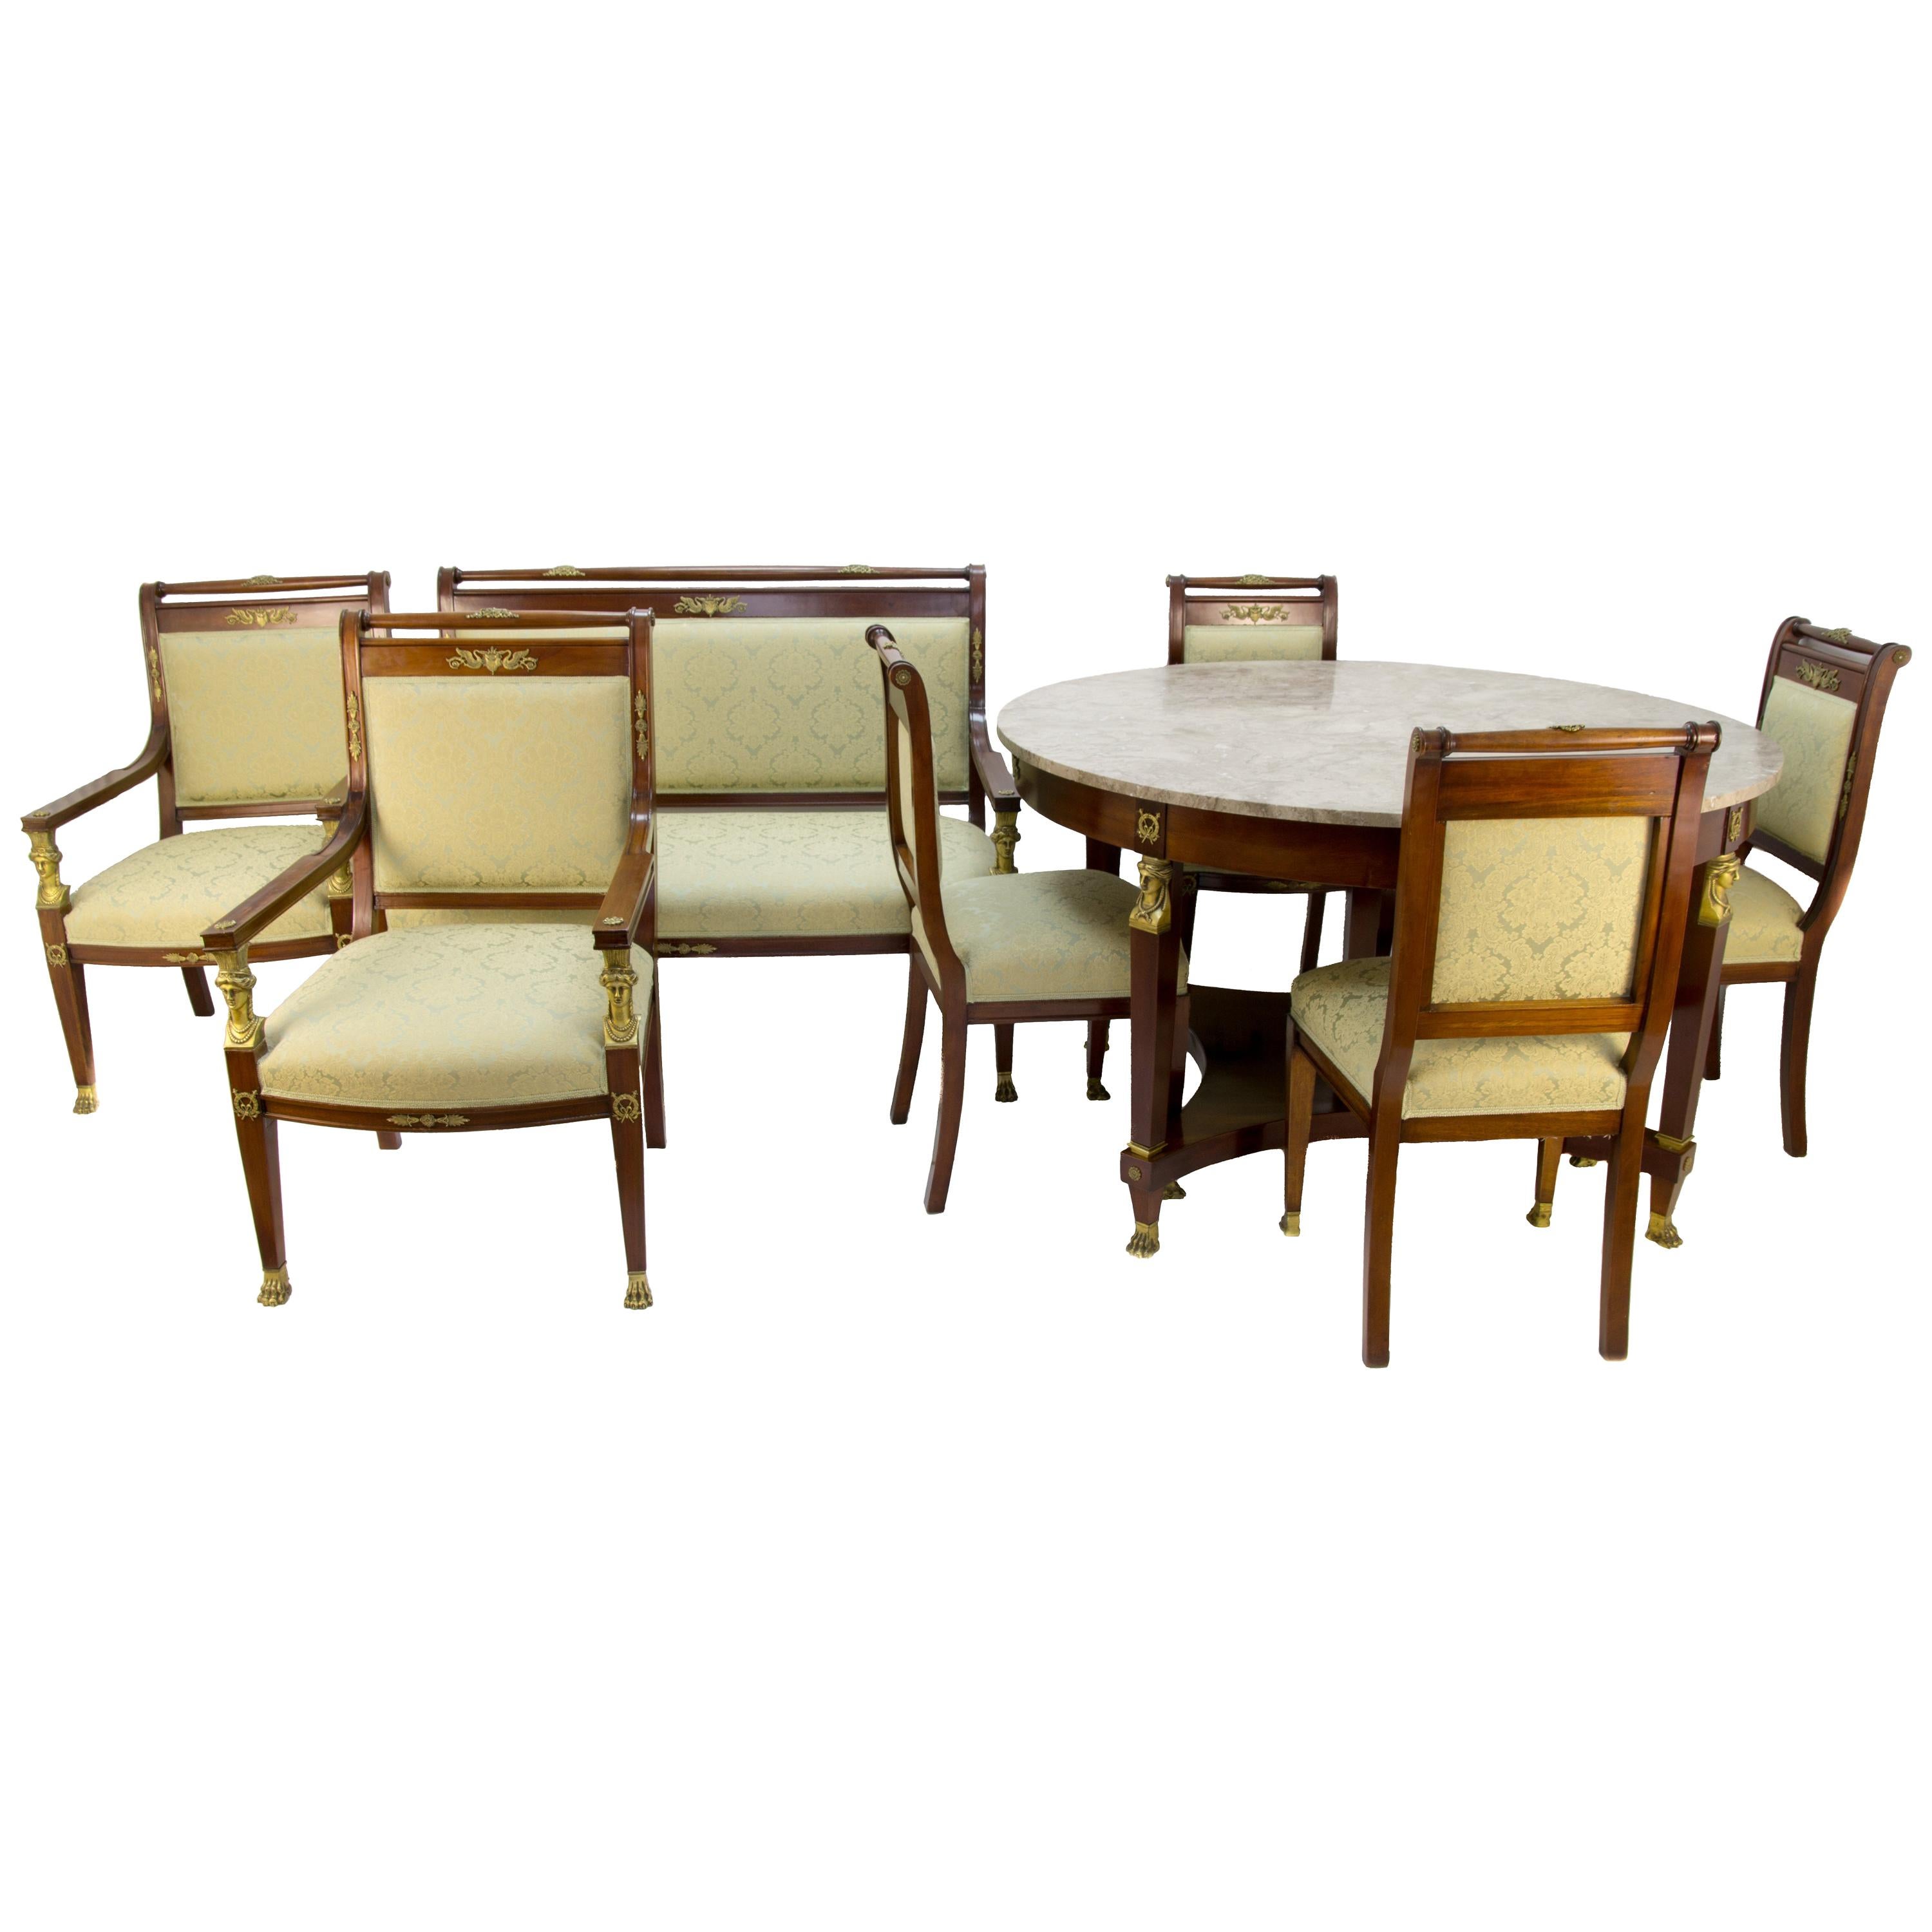 French Empire Style Walnut, Bronze, and Marble Table and Chairs Living Room Set For Sale